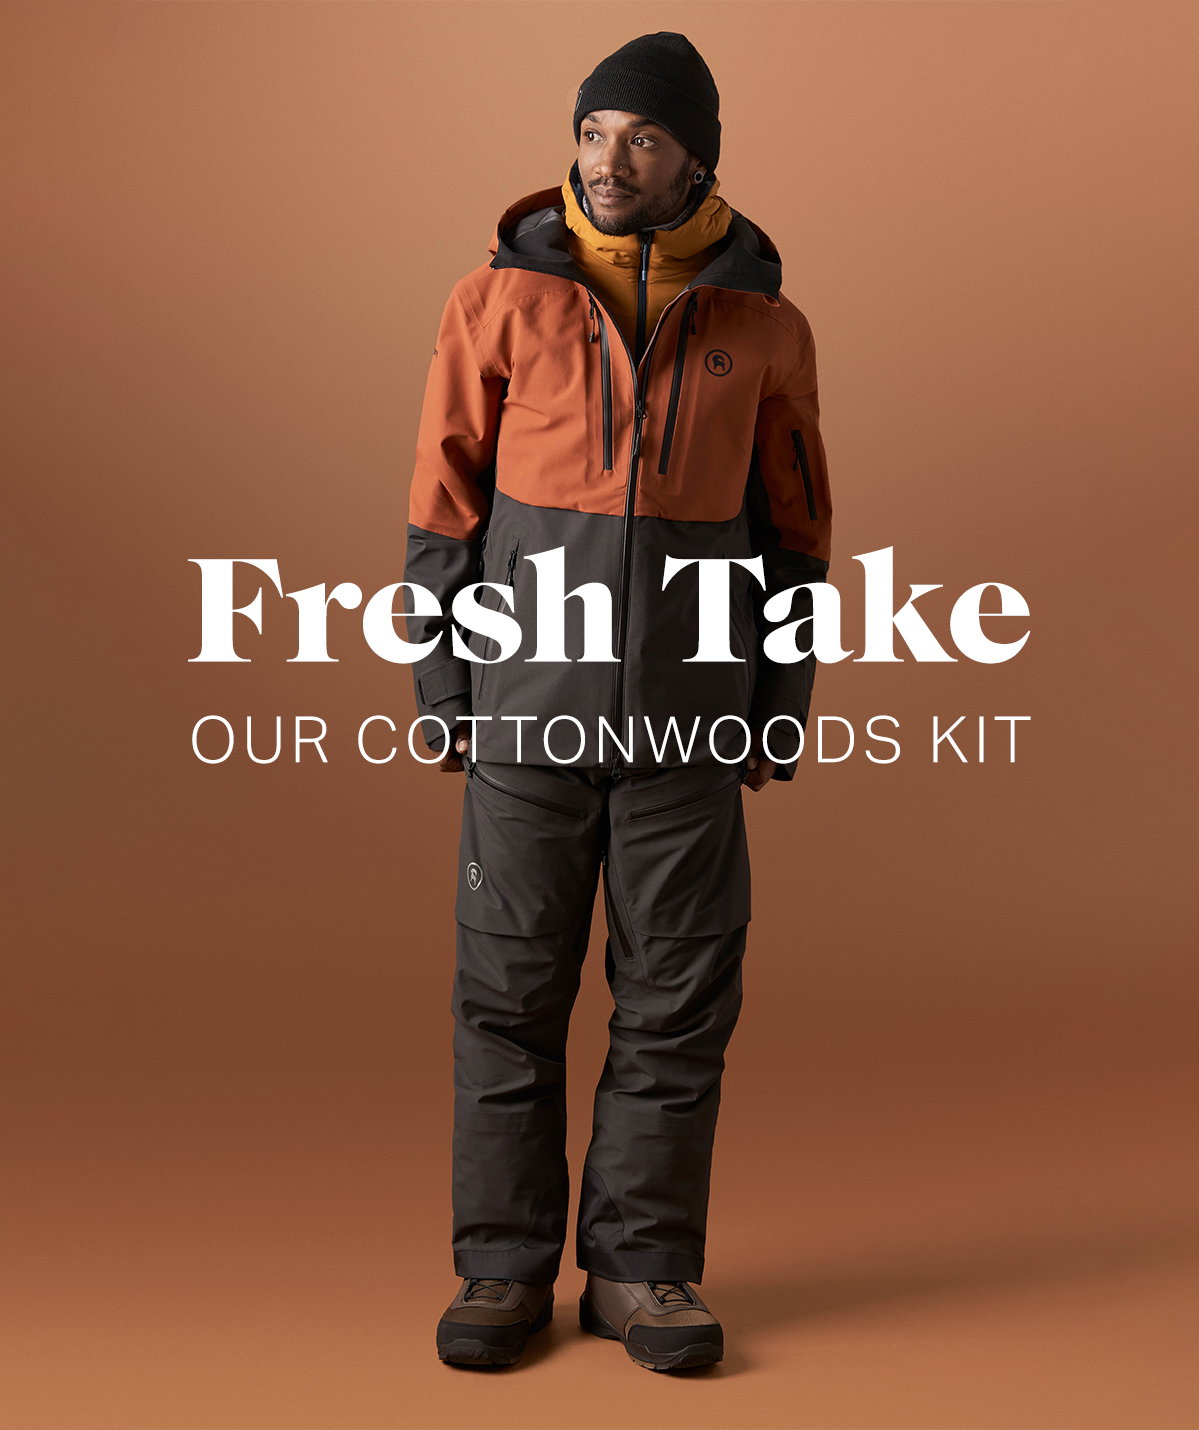 Backcountry Com The Bib Is Back Our Bestselling Cottonwoods Kit Returns Milled